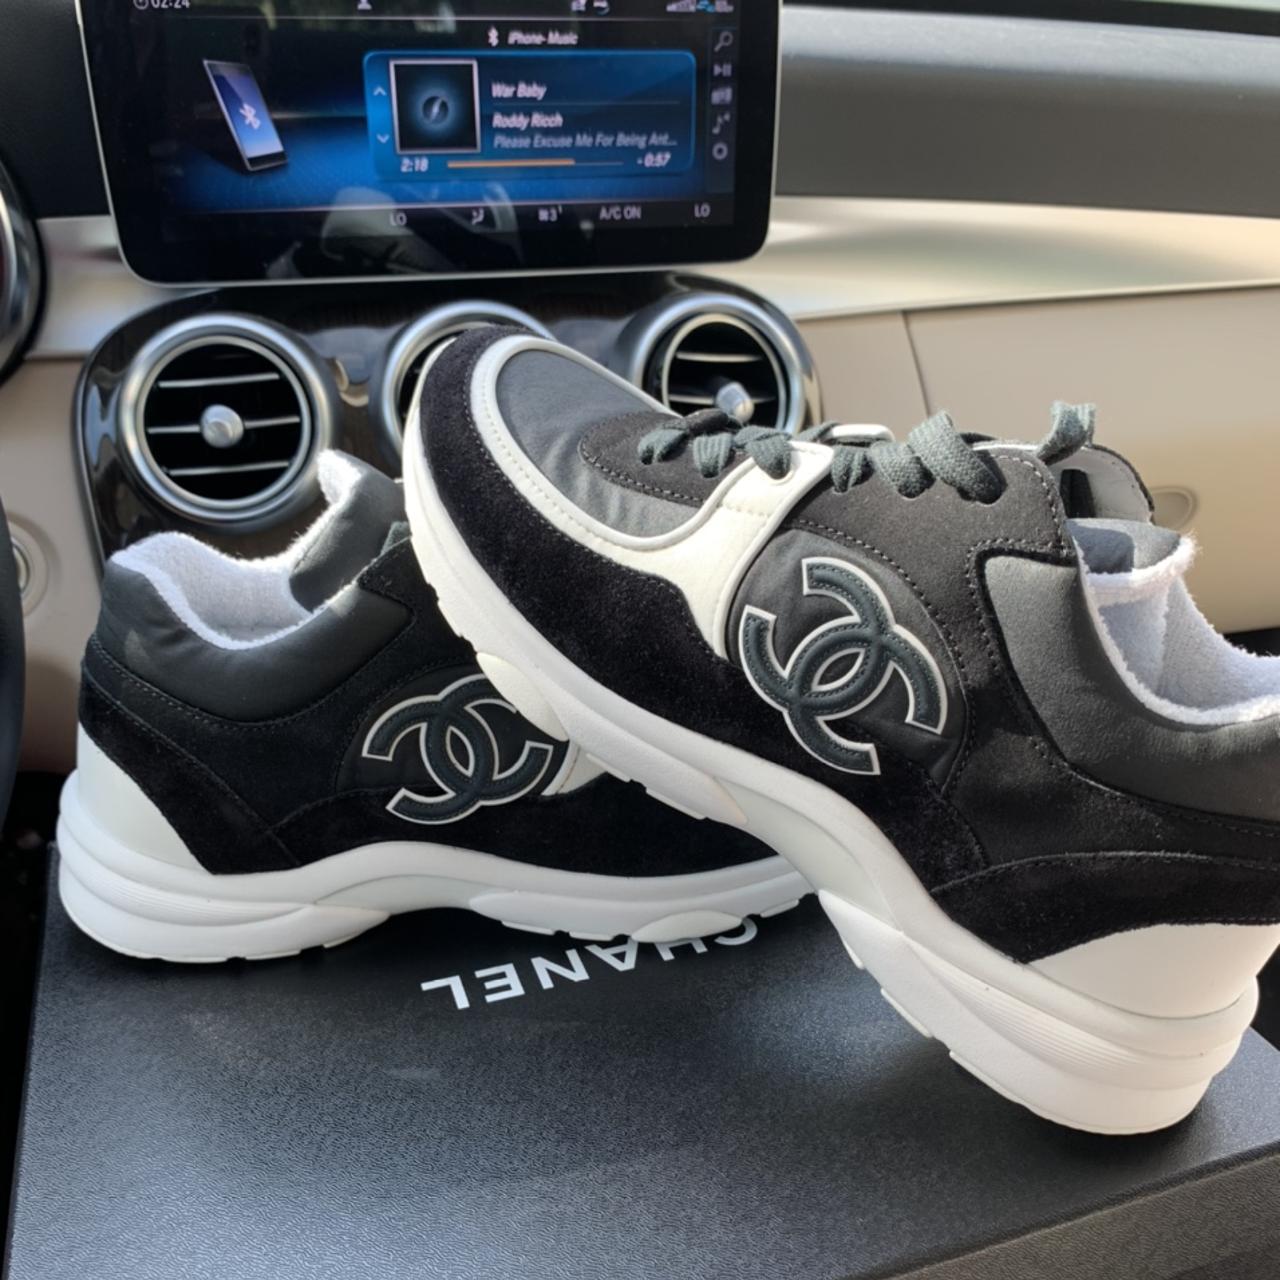 Chanel Trainers in brand new condition, never worn - Depop